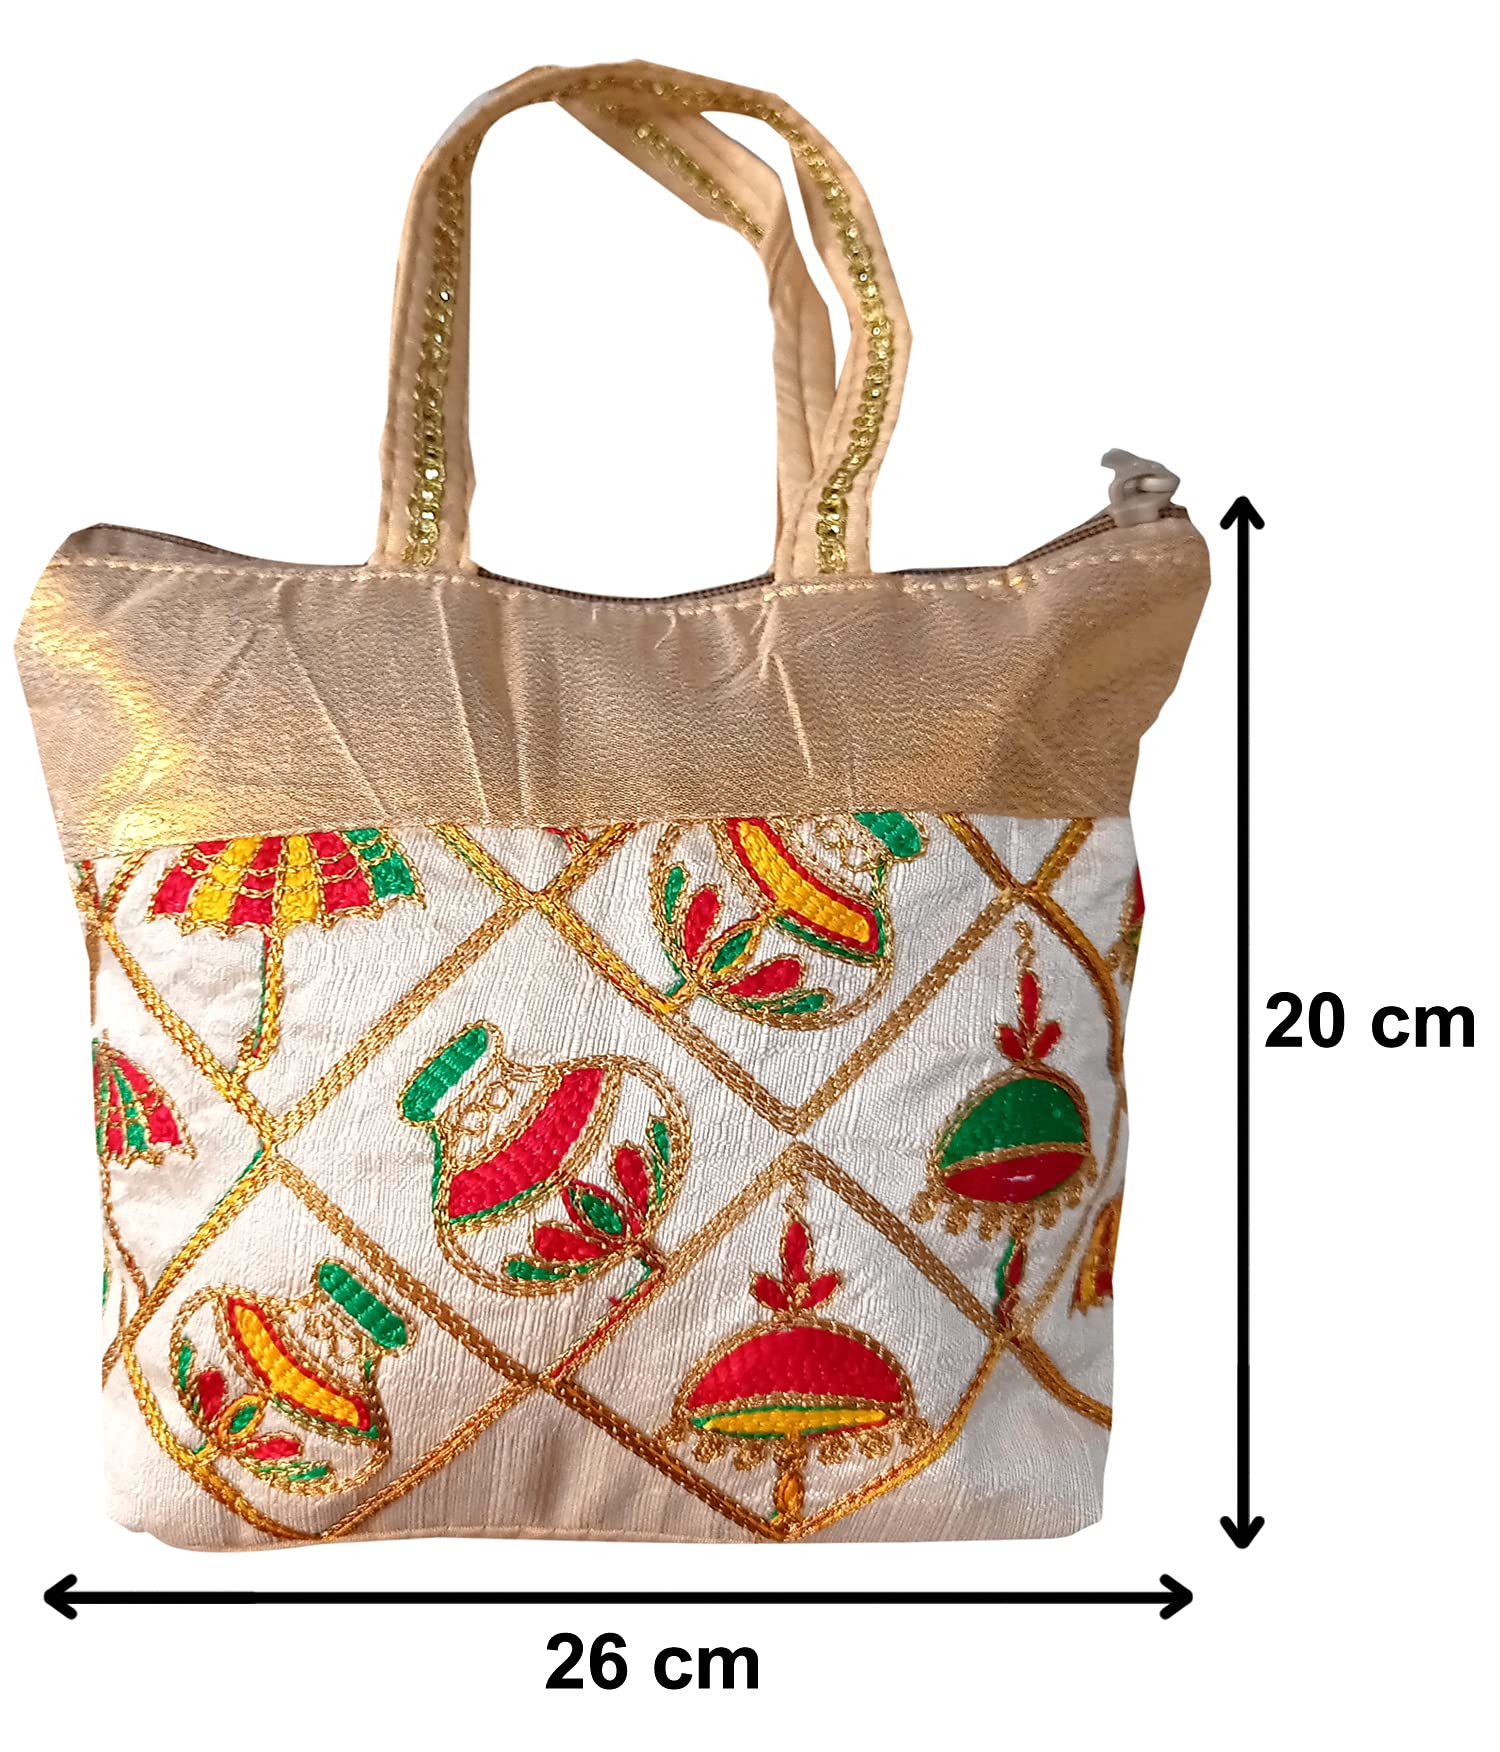 Kuber Industries Embroidery Small Hand Bag, Tote Bag For Women & Girls (Gold)-HS_38_KUBMART21478, Pack of 1